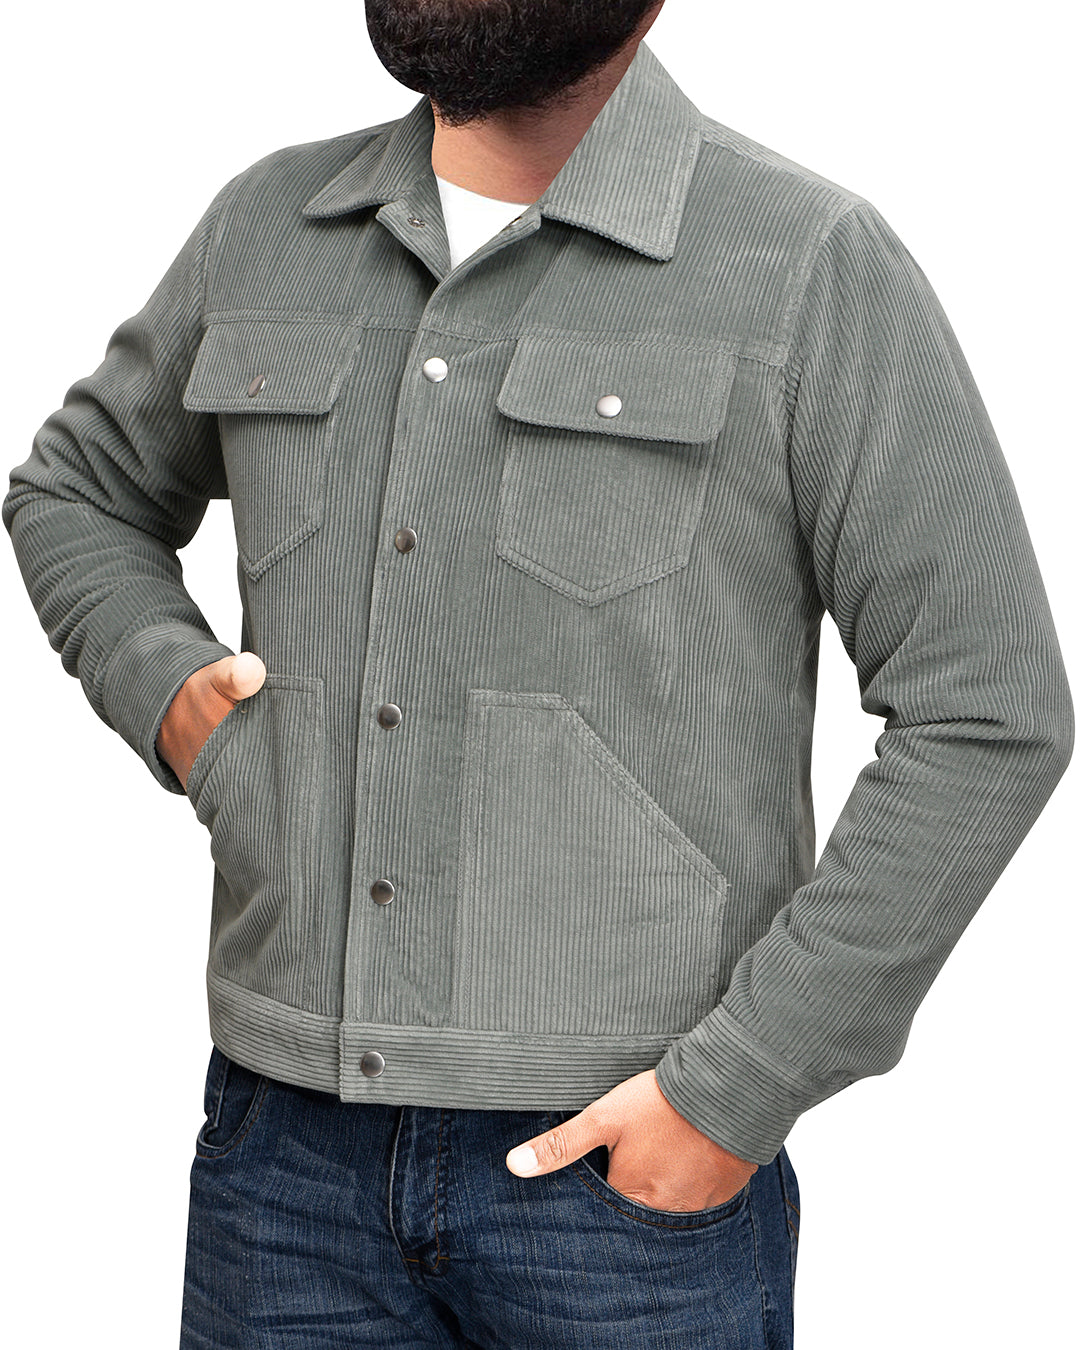 Front of model wearing the corduroy shirt jacket for men by Luxire in duck egg